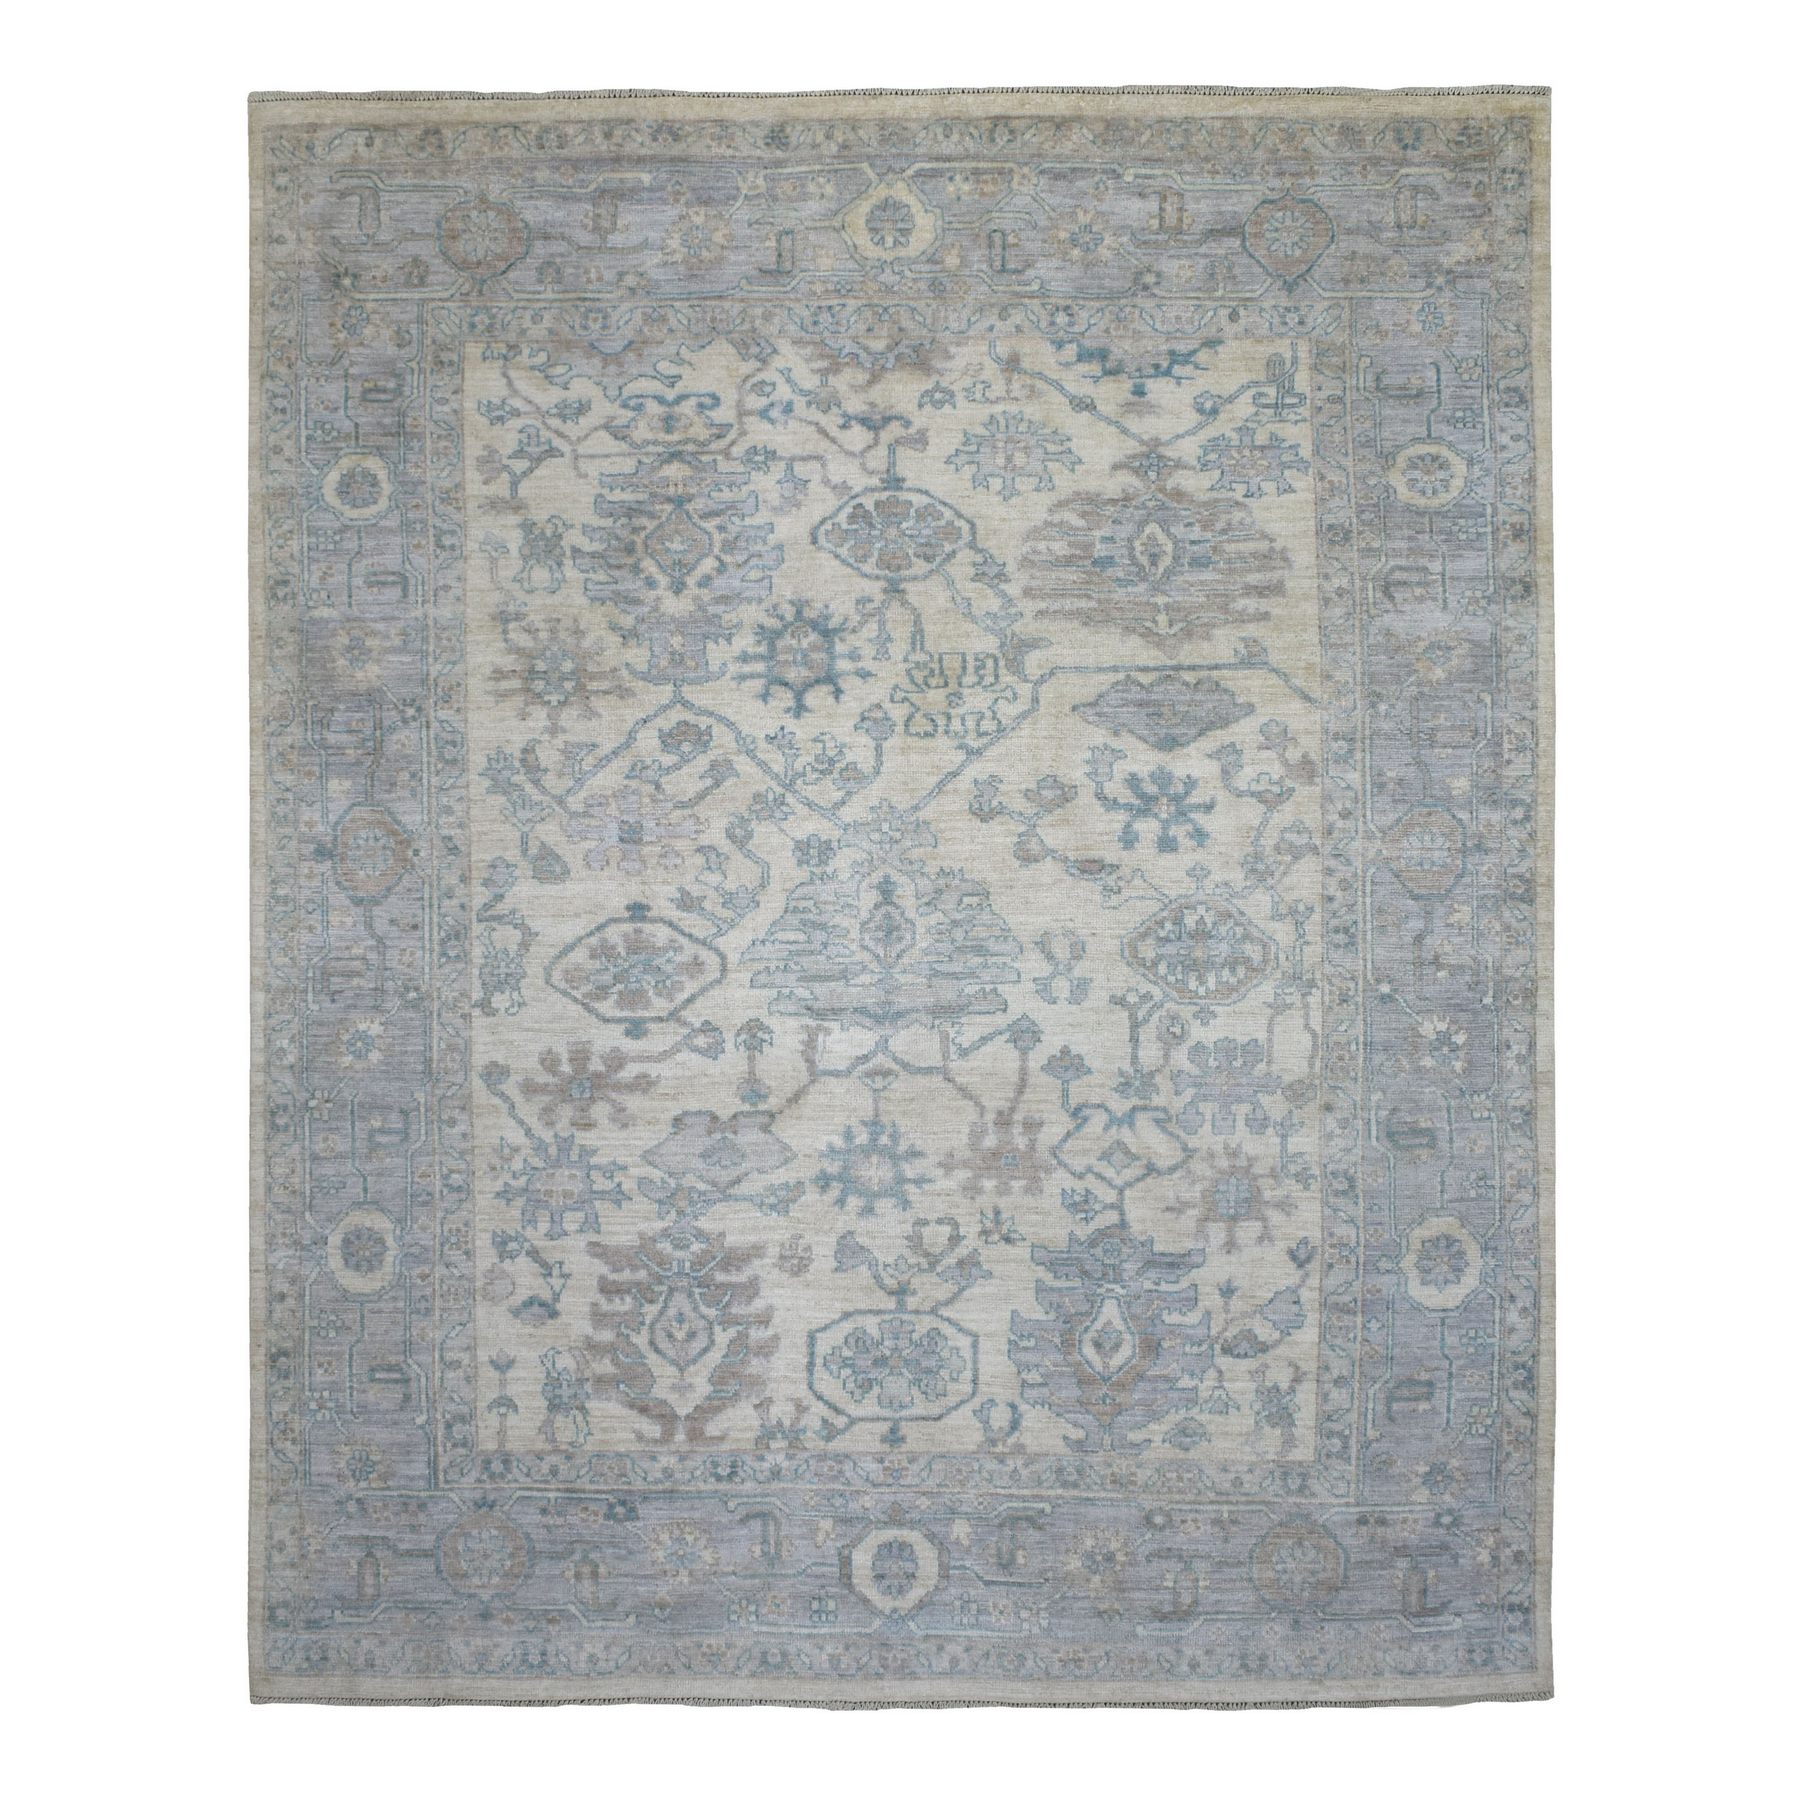 7'10"x9'11" All Over Design Afghan Angora Oushak with Ivory-Blue Color Scheme Organic Wool Hand Woven Oriental Rug 